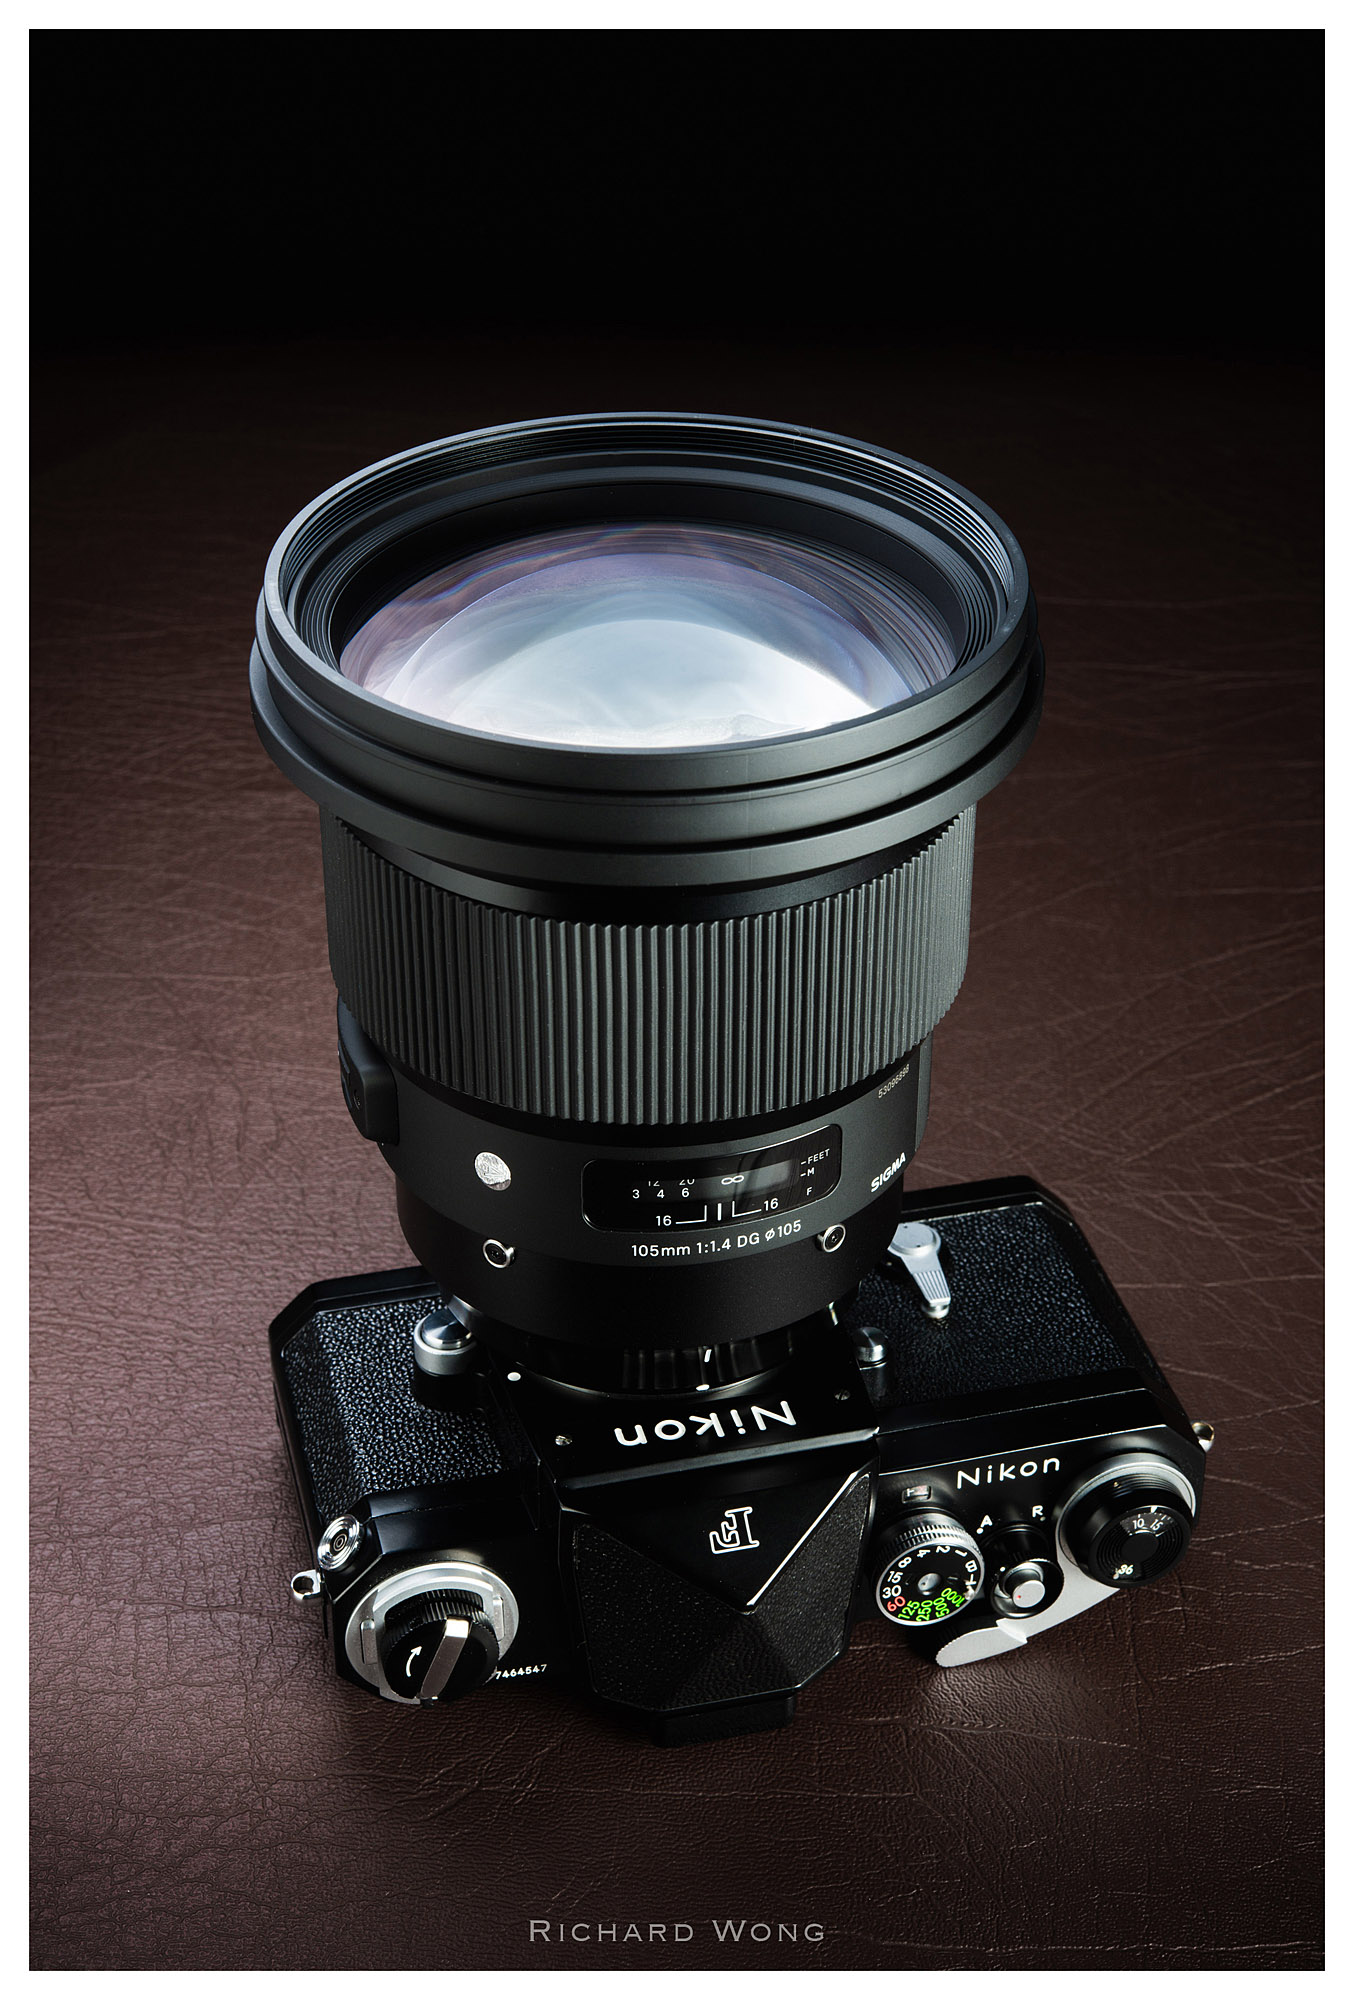 Sigma 105mm f/1.4 DG ART Lens review – Review By Richard